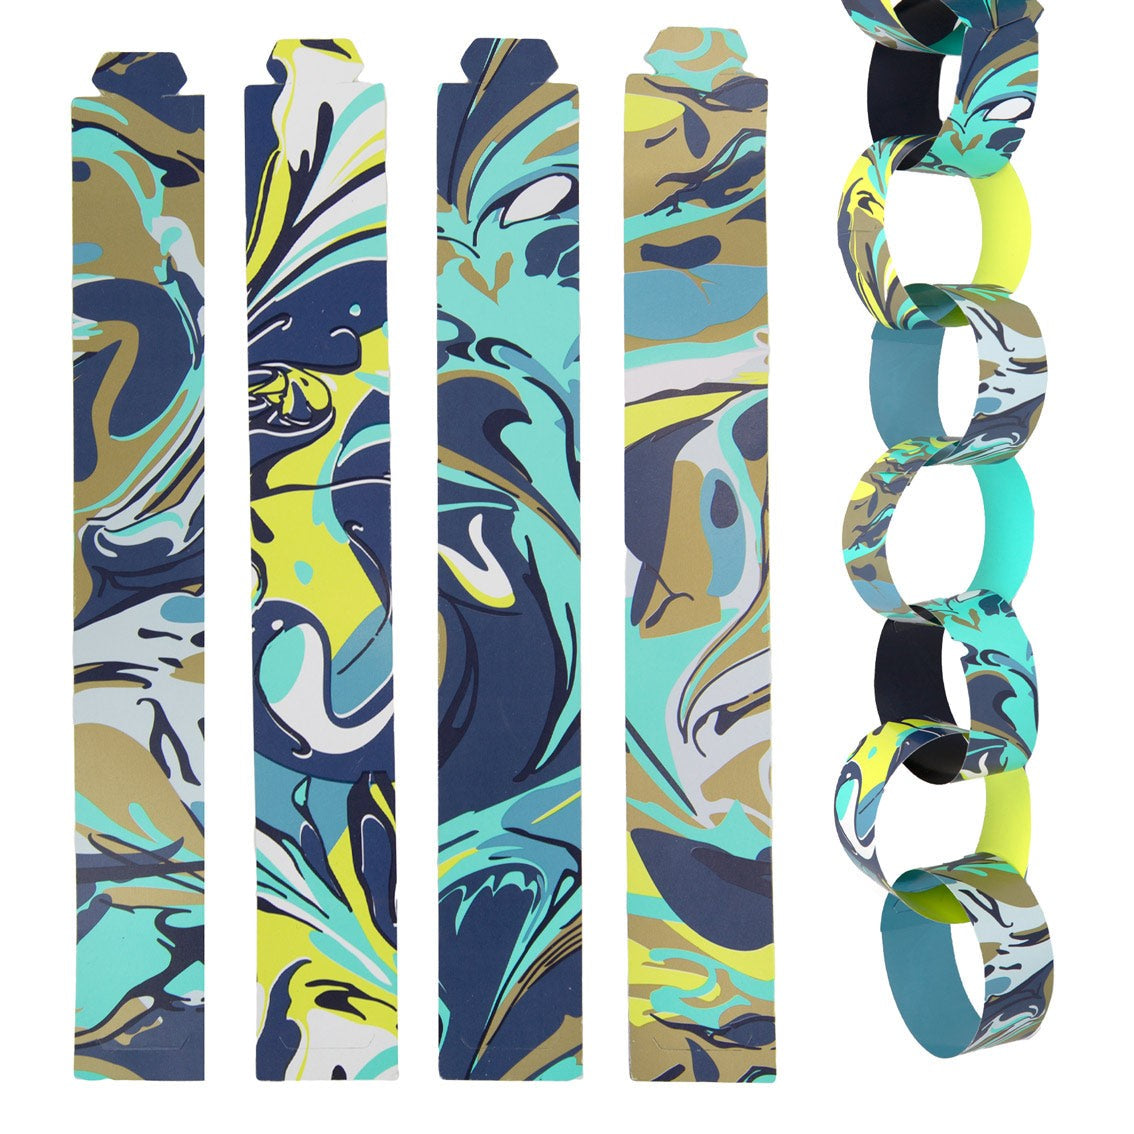 Marbled Paper Chain Decoration